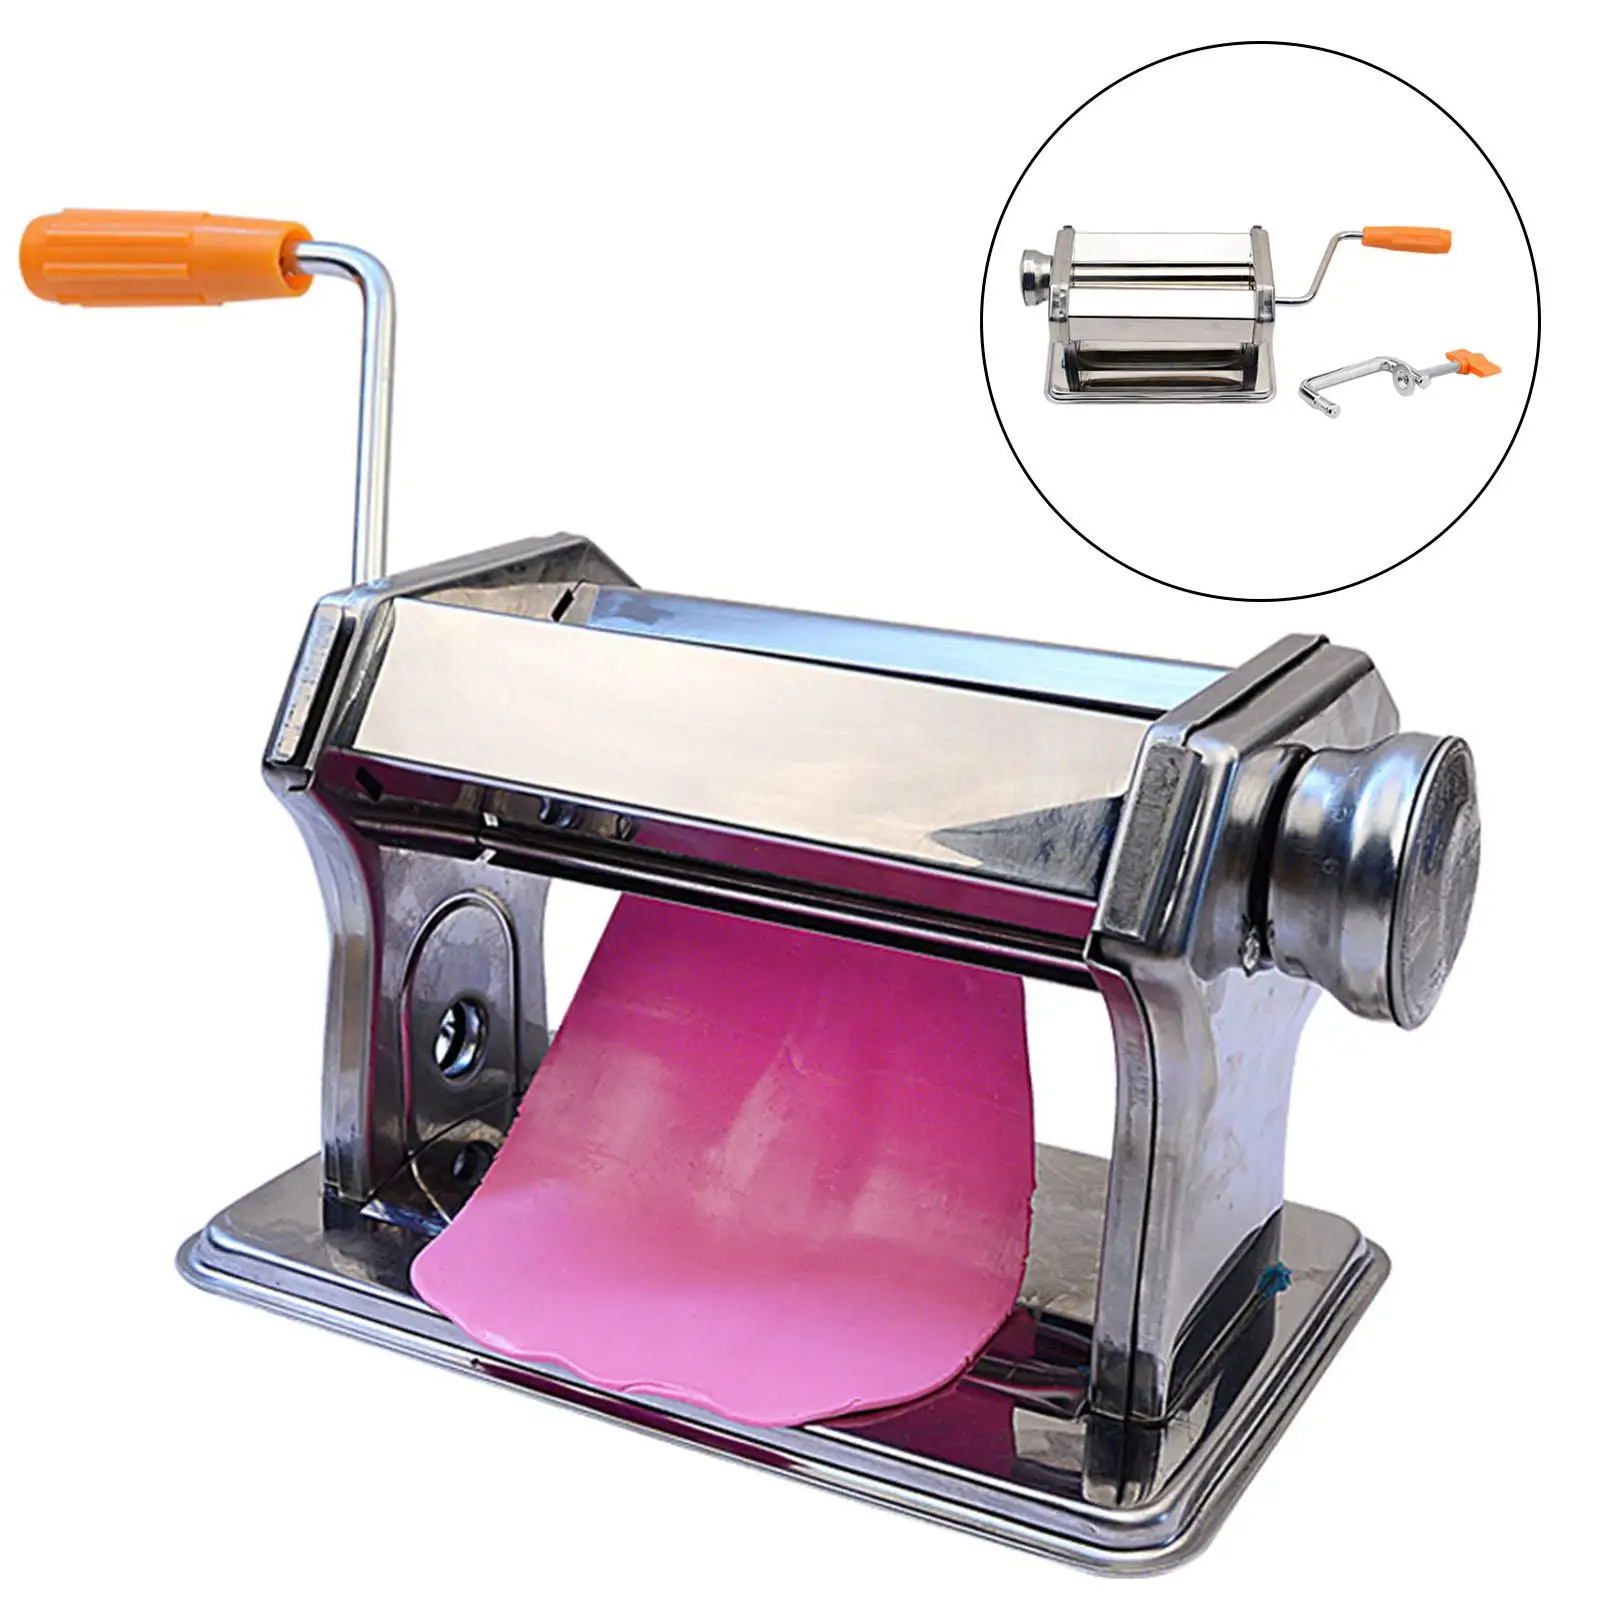 Clay Pressure Machine Mixing Colors Manual Polymer Clay Roller Machine for Polymer Clay